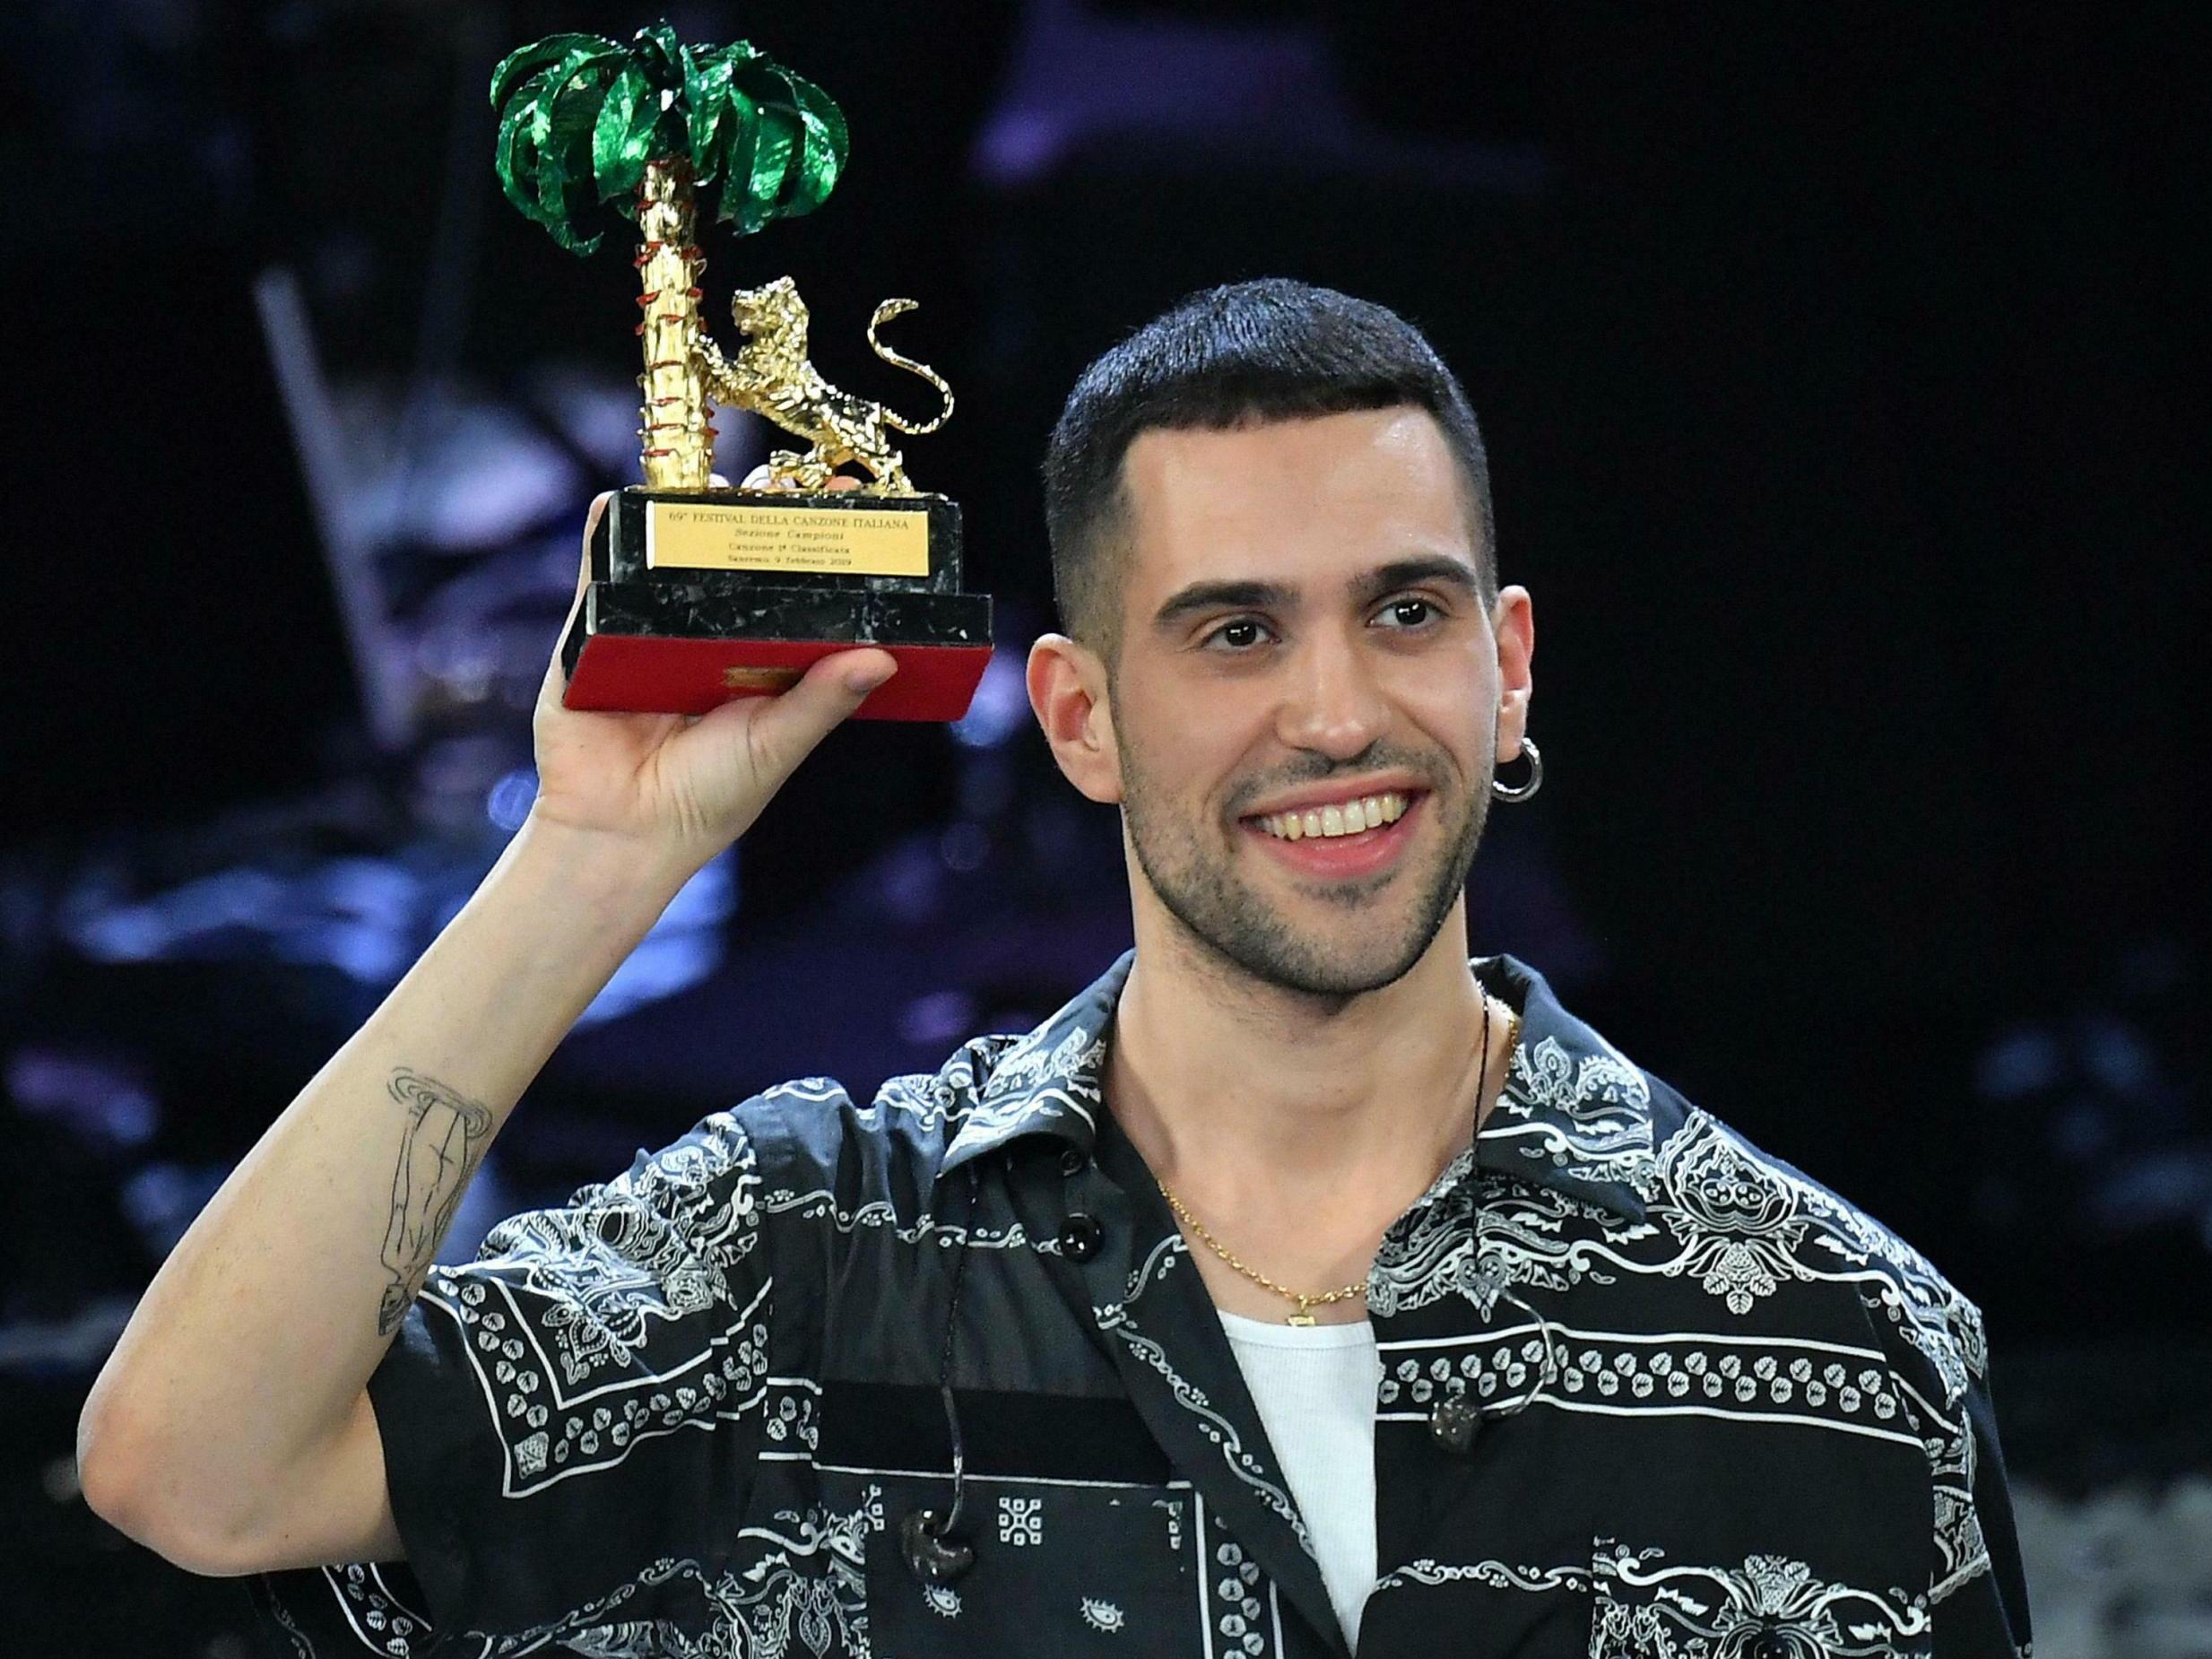 Alessandro Mahmoud, also known as ‘Mahmood’ won the Sanremo festival this month